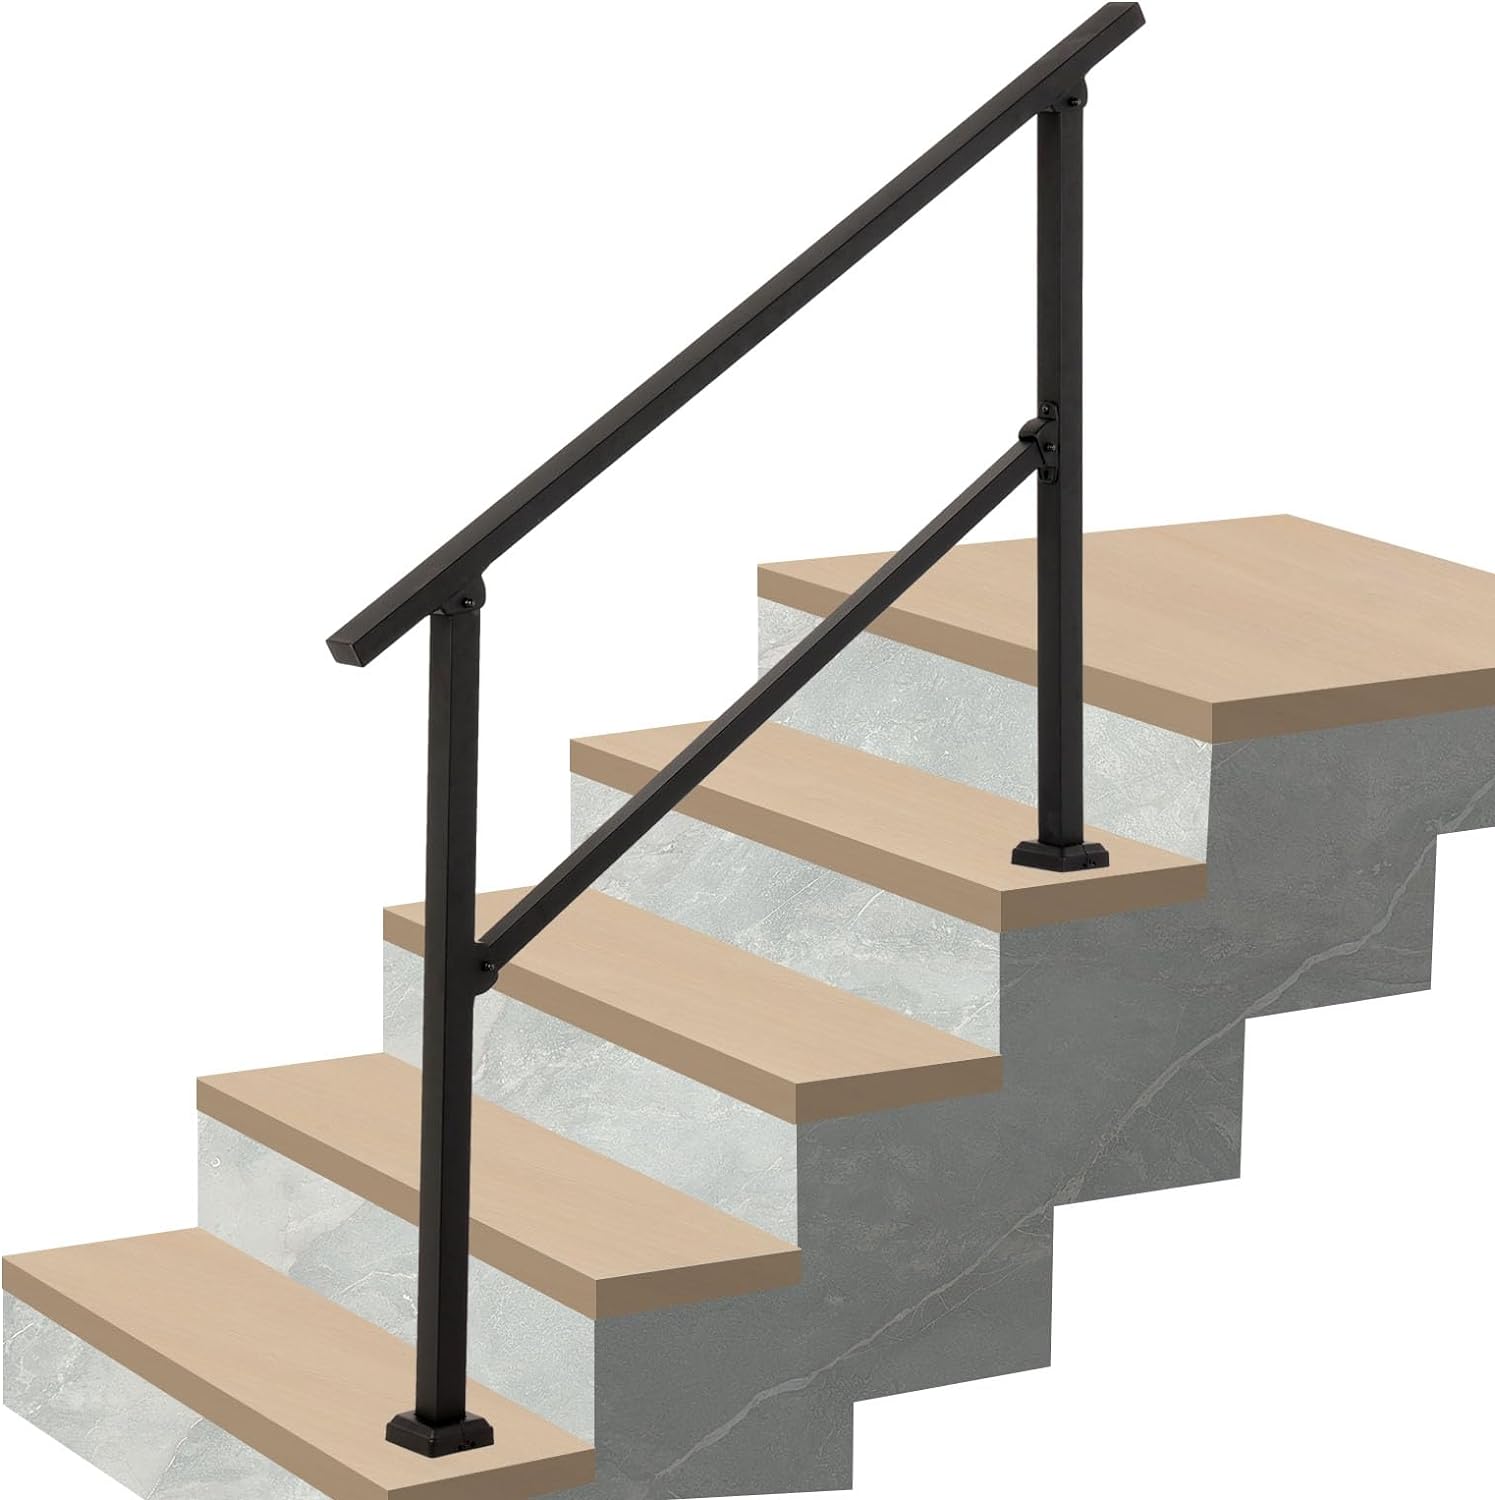 LUCKUP Handrails for Outdoor Steps, Fit 3-4 Stairs Railing for Exterior Steps, Wrought Iron Railing with Installation Kit for Deck Gates Porch Concrete Fit